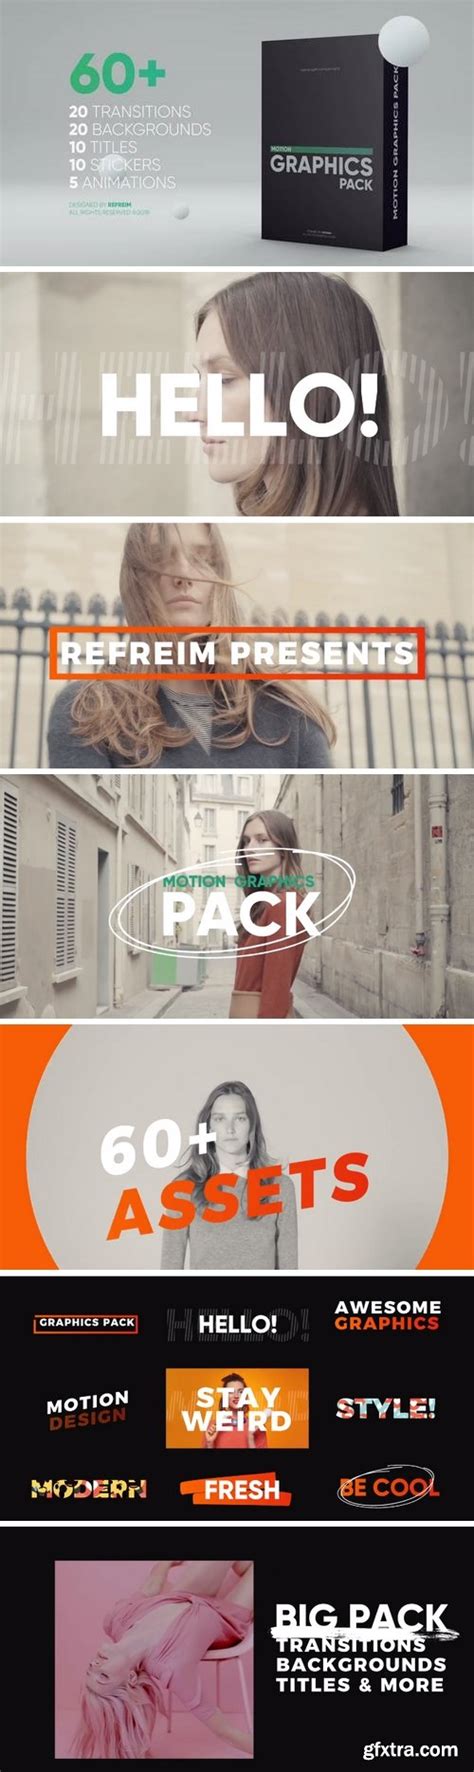 MA - Motion Graphics Pack After Effects Templates 146885 » GFxtra